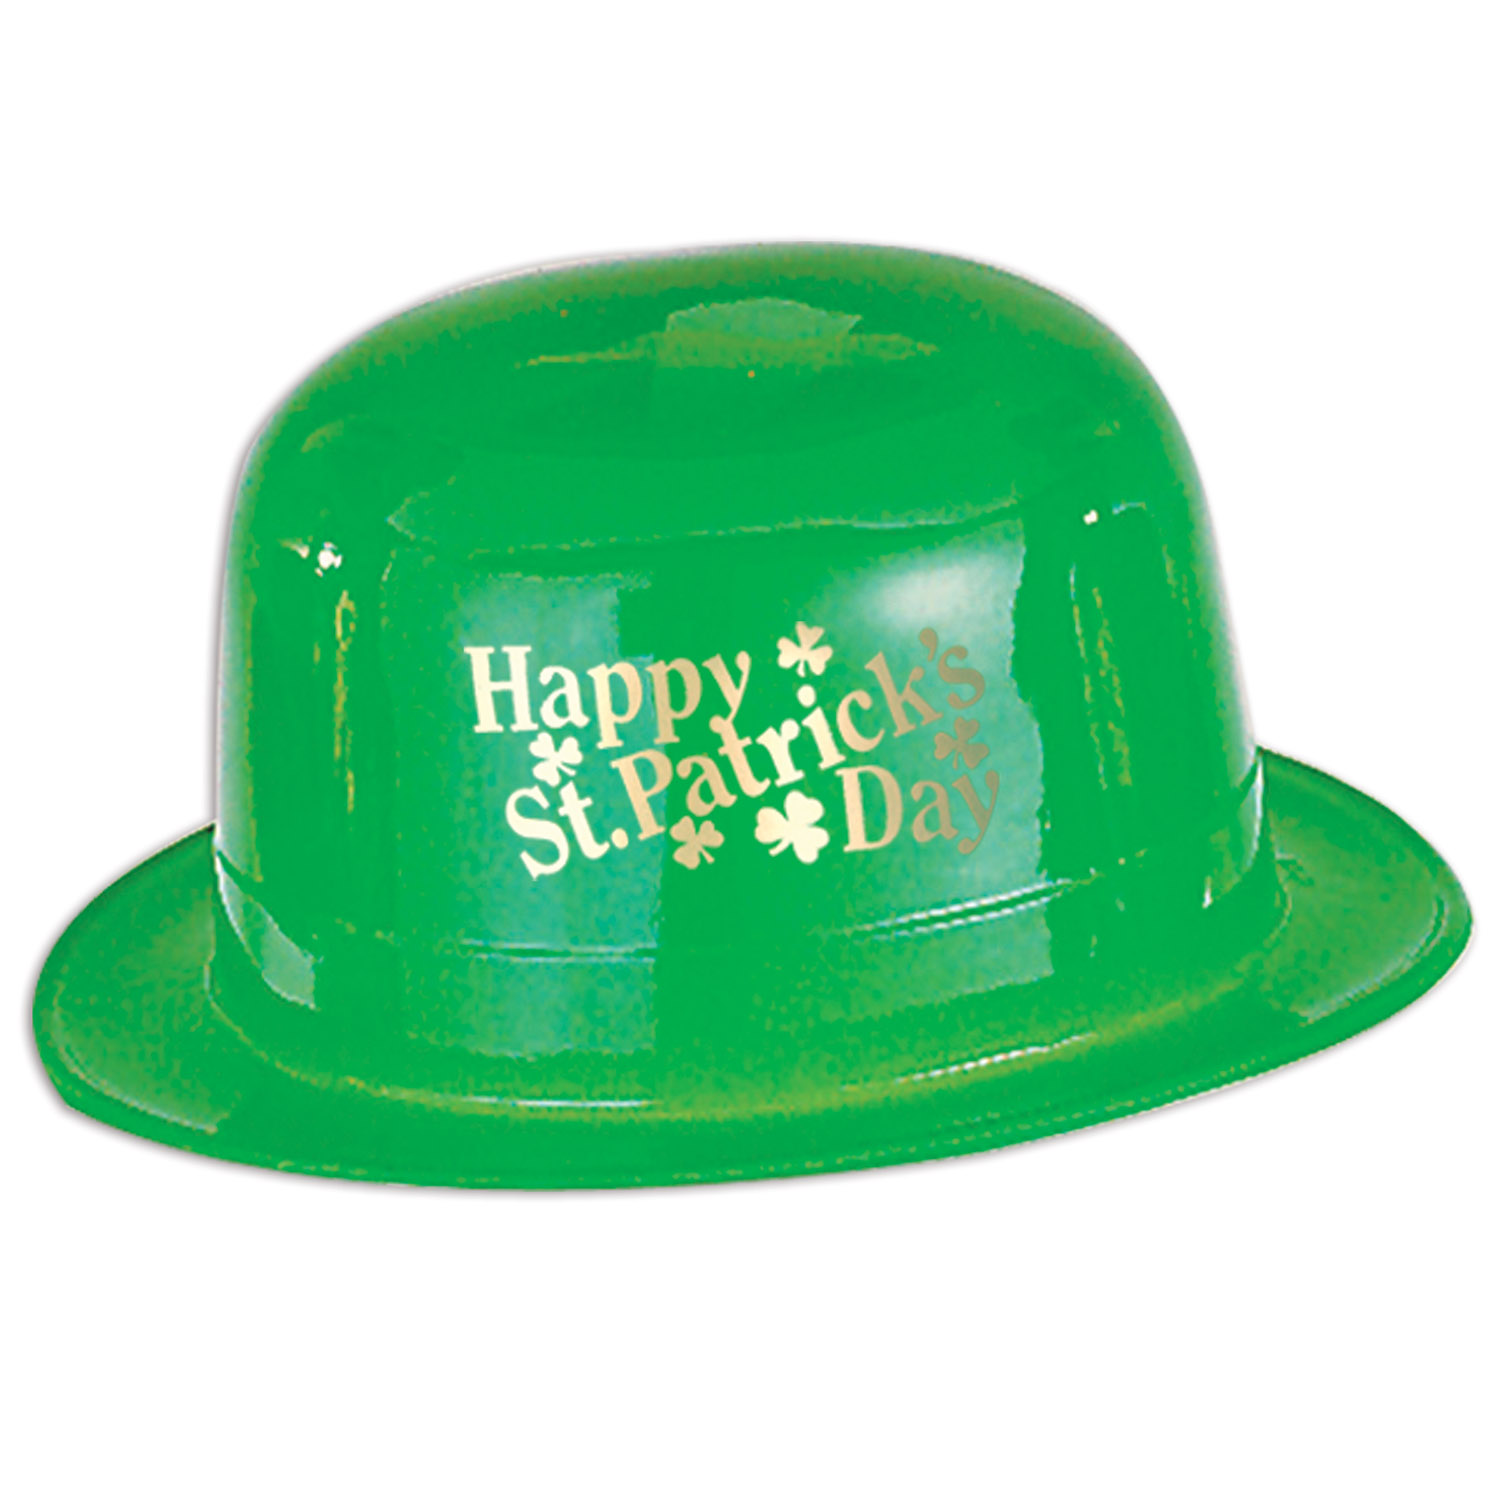 48 Pieces of Plastic Happy St Patrick's Day Derby